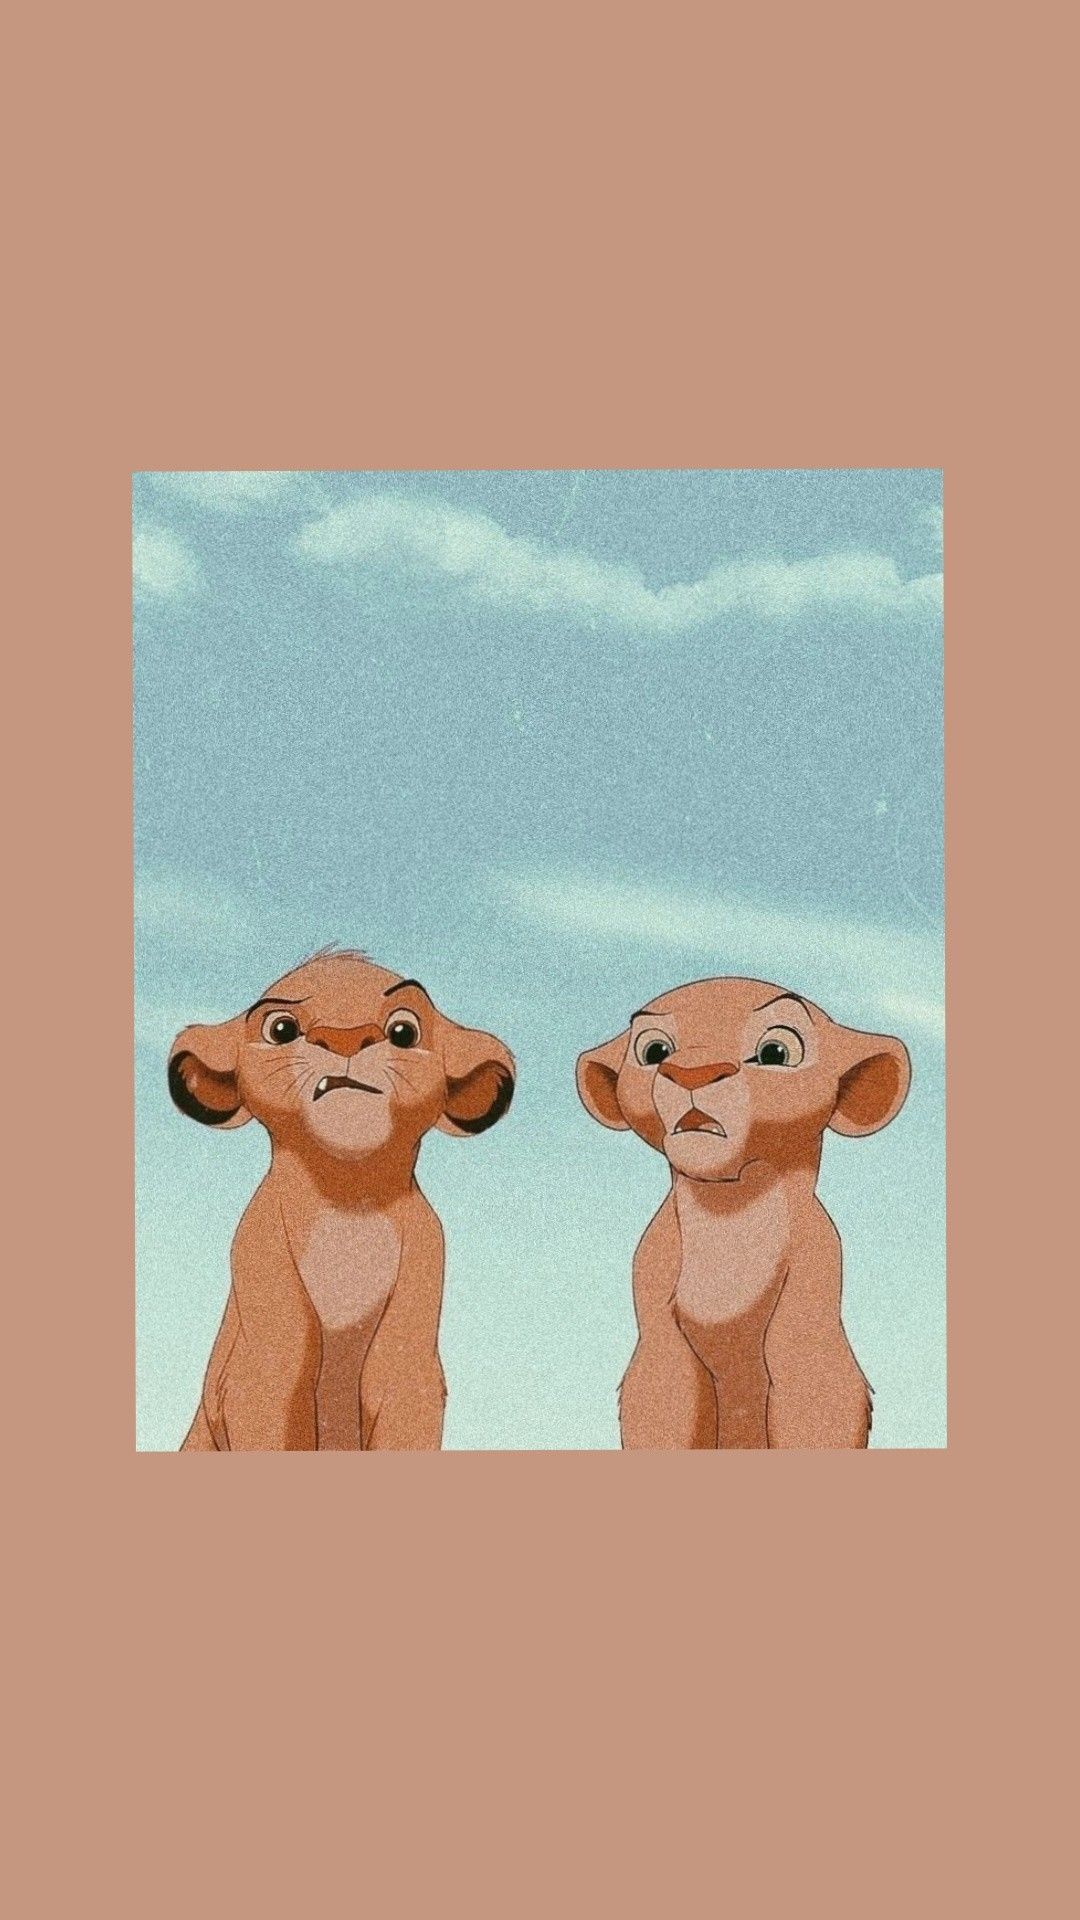 IPhone wallpaper lion king with high-resolution 1080x1920 pixel. You can use this wallpaper for your iPhone 5, 6, 7, 8, X, XS, XR backgrounds, Mobile Screensaver, or iPad Lock Screen - The Lion King